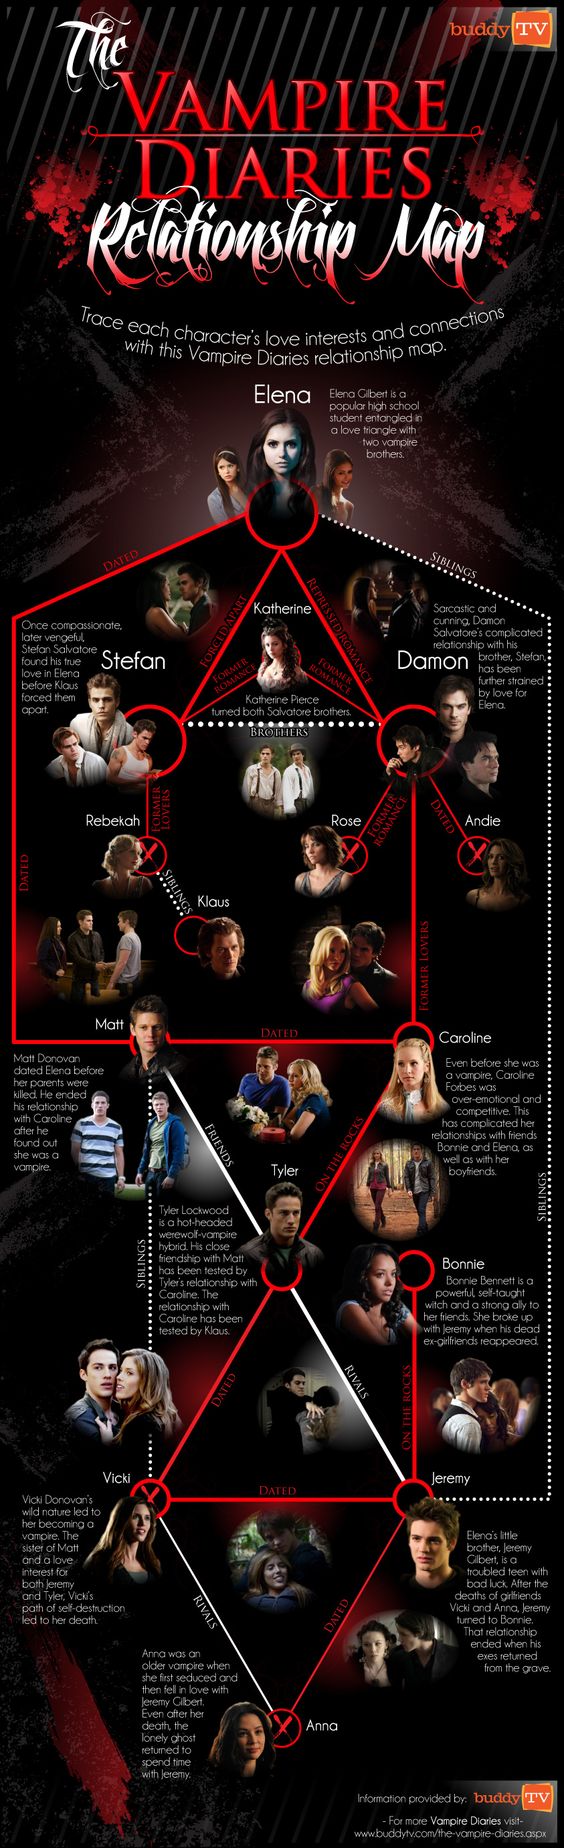 'The Vampire Diaries' Infographic: How the Many Relationships Connect